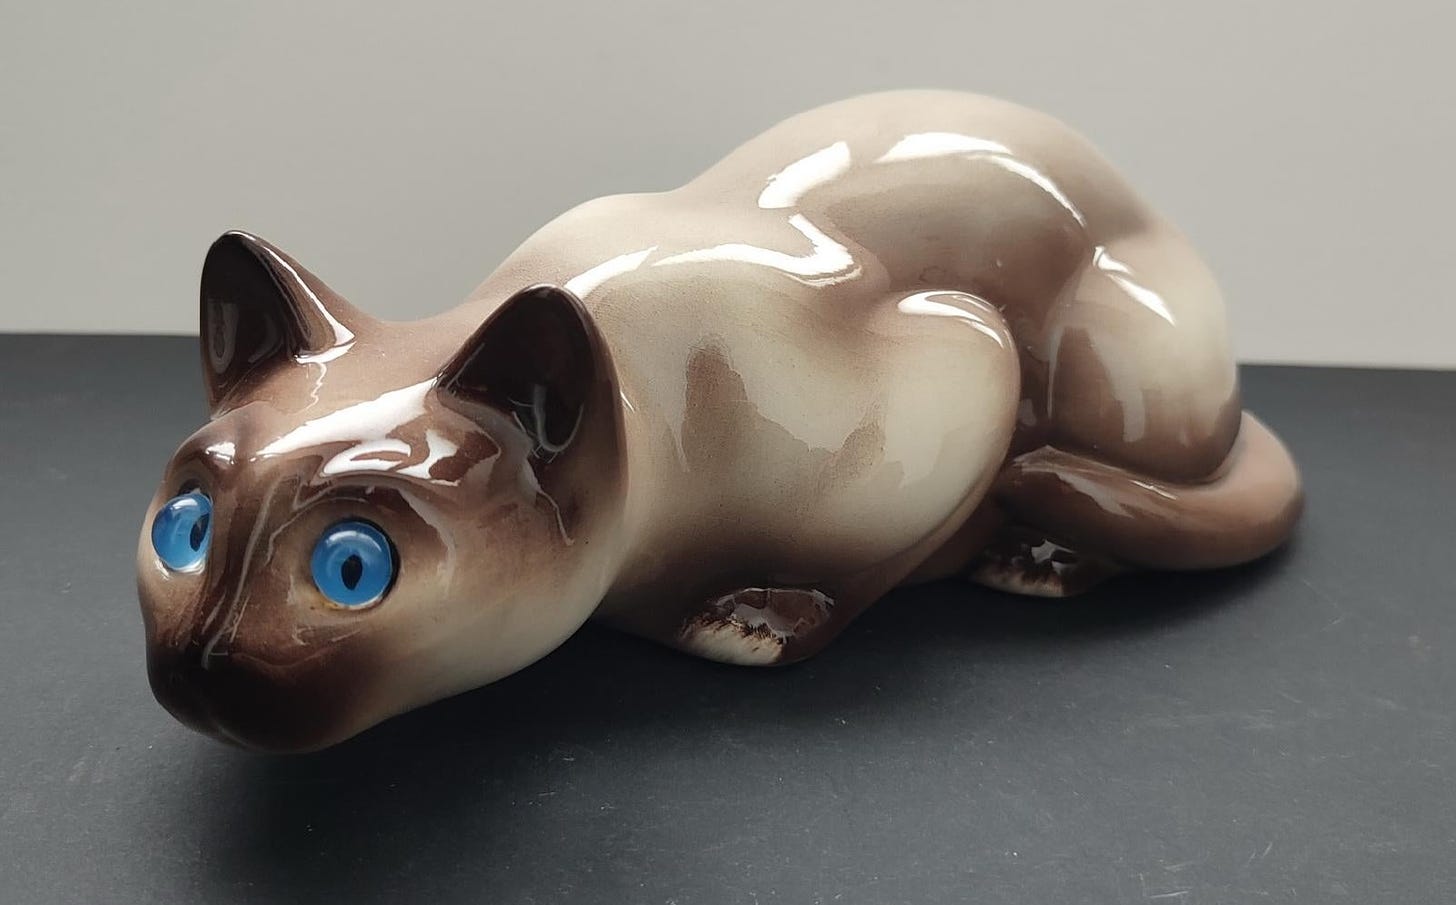 Porcelain crouching Siamese cat with blue eyes